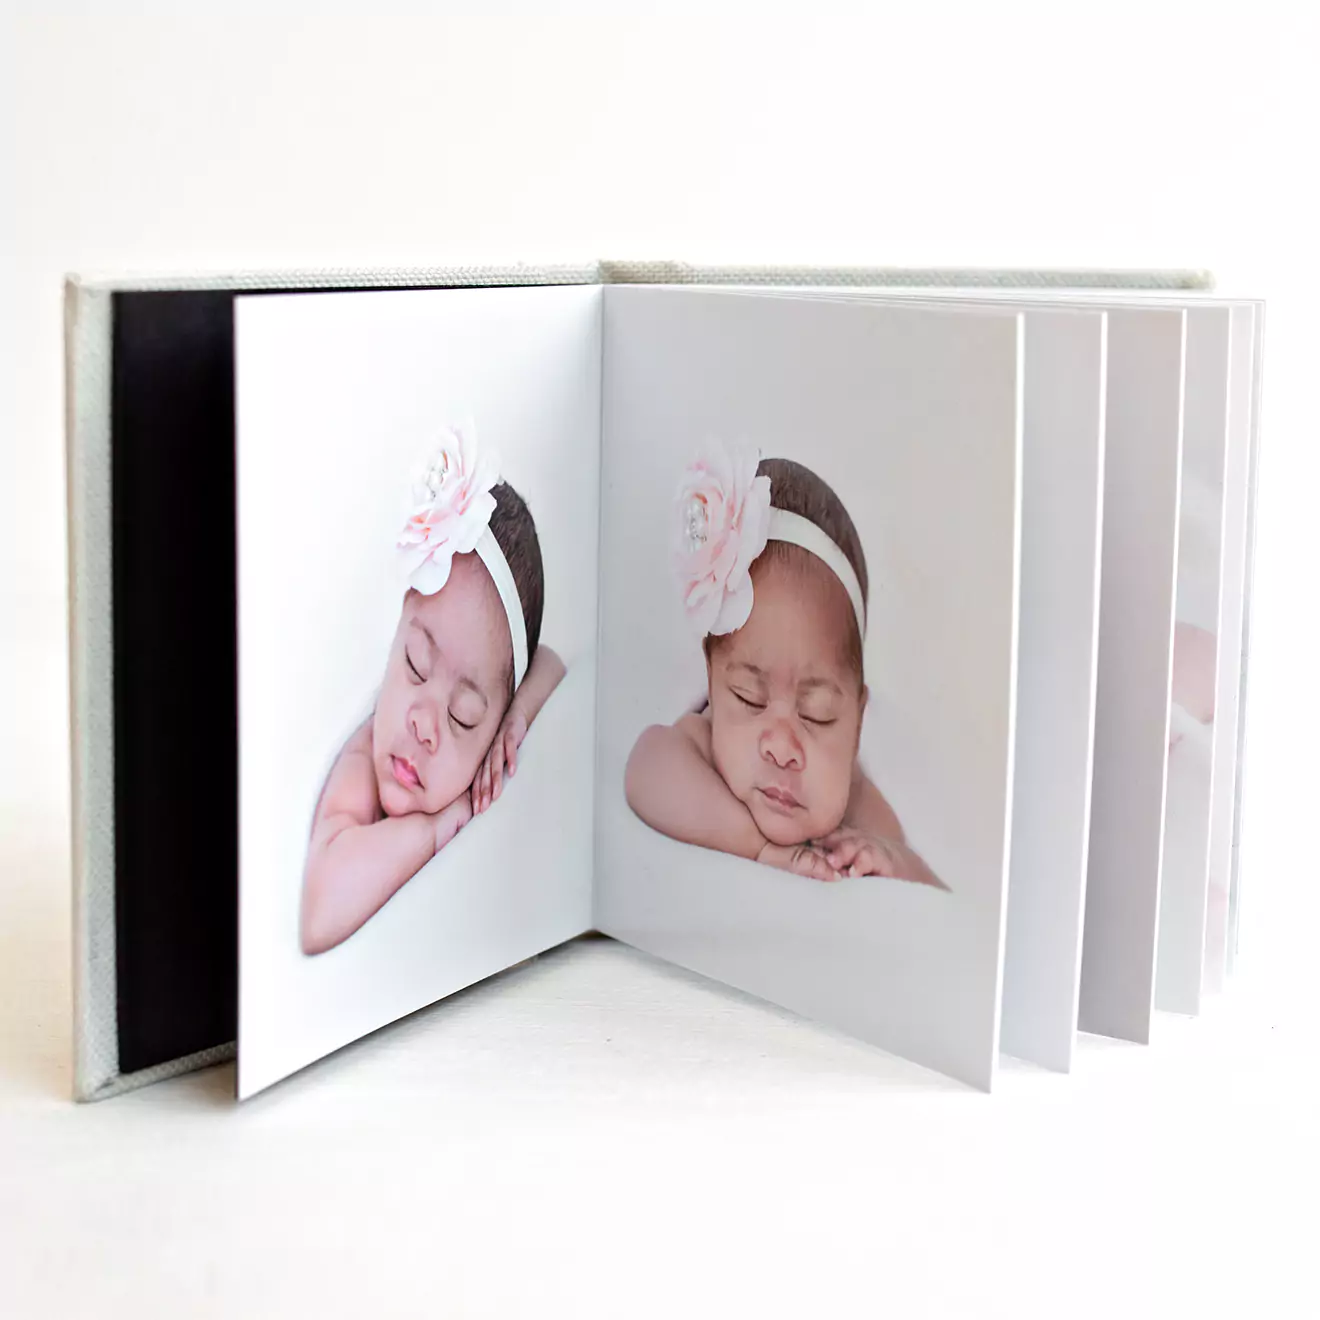 Rapidstudio small bragbook photobook with linen cover and layflat pages